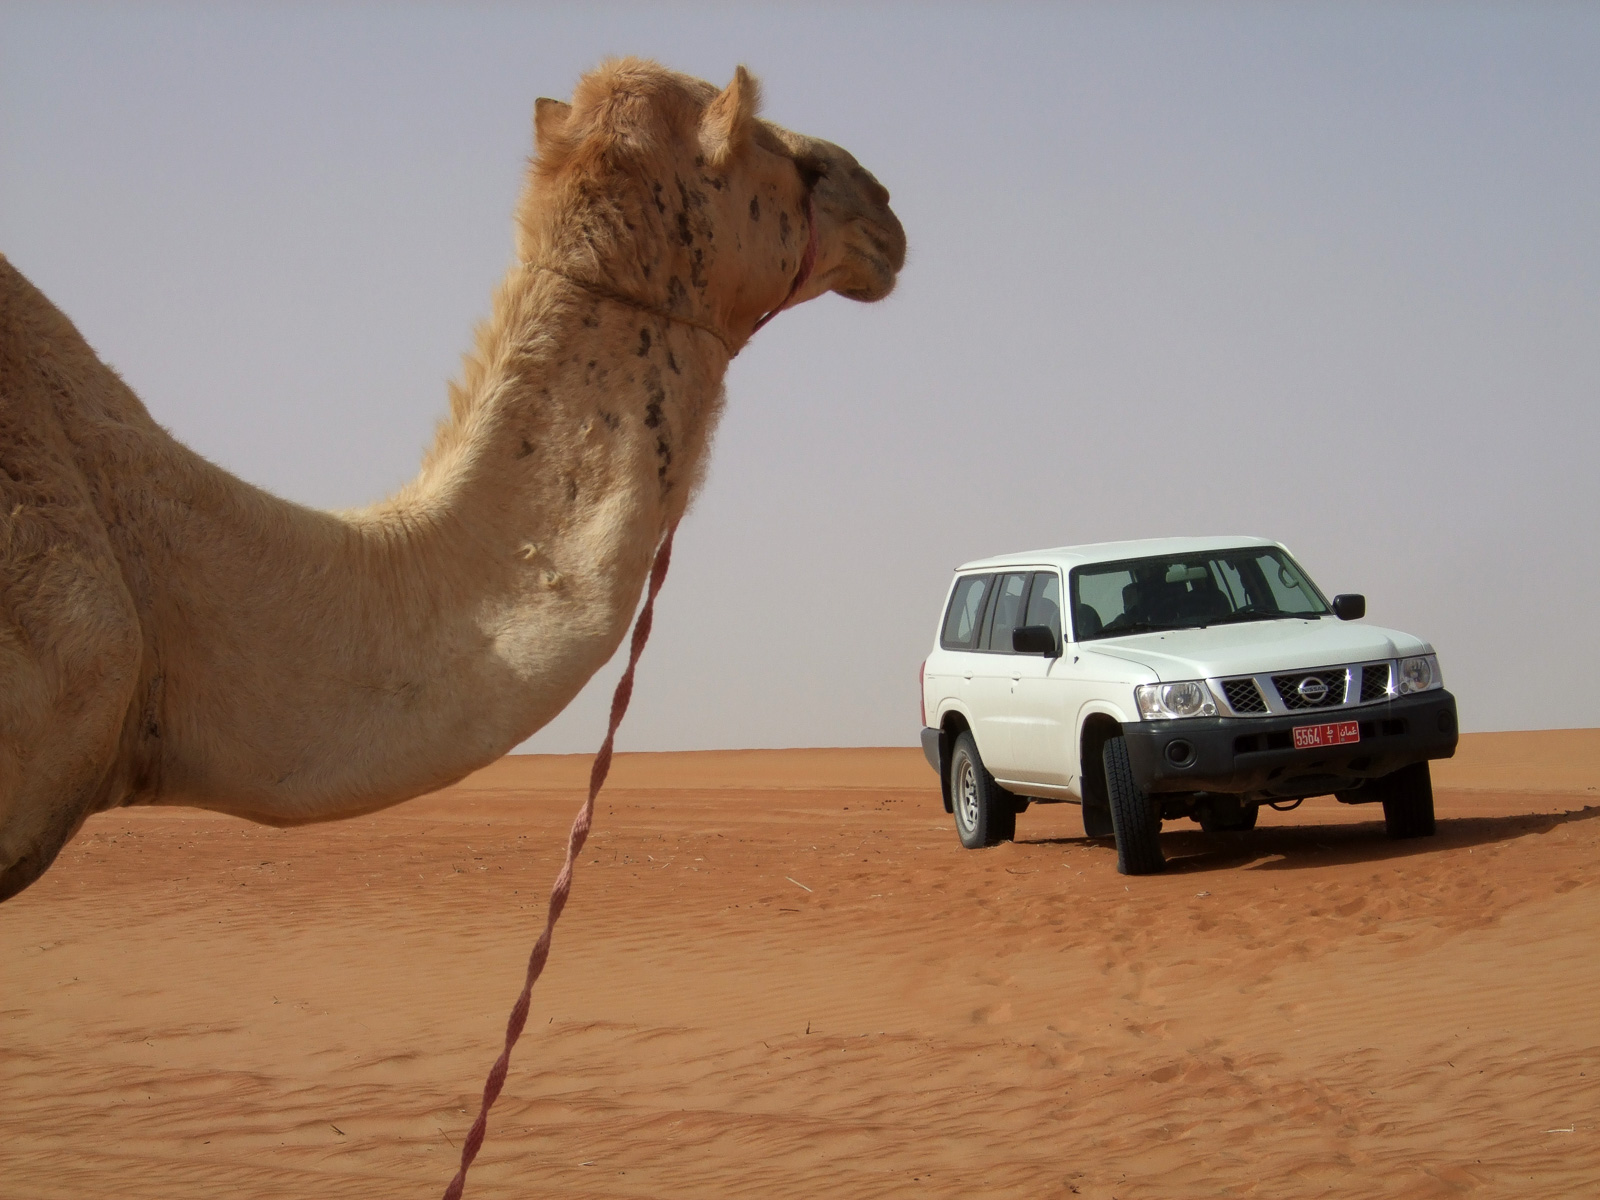 Oman Deserts and Camels